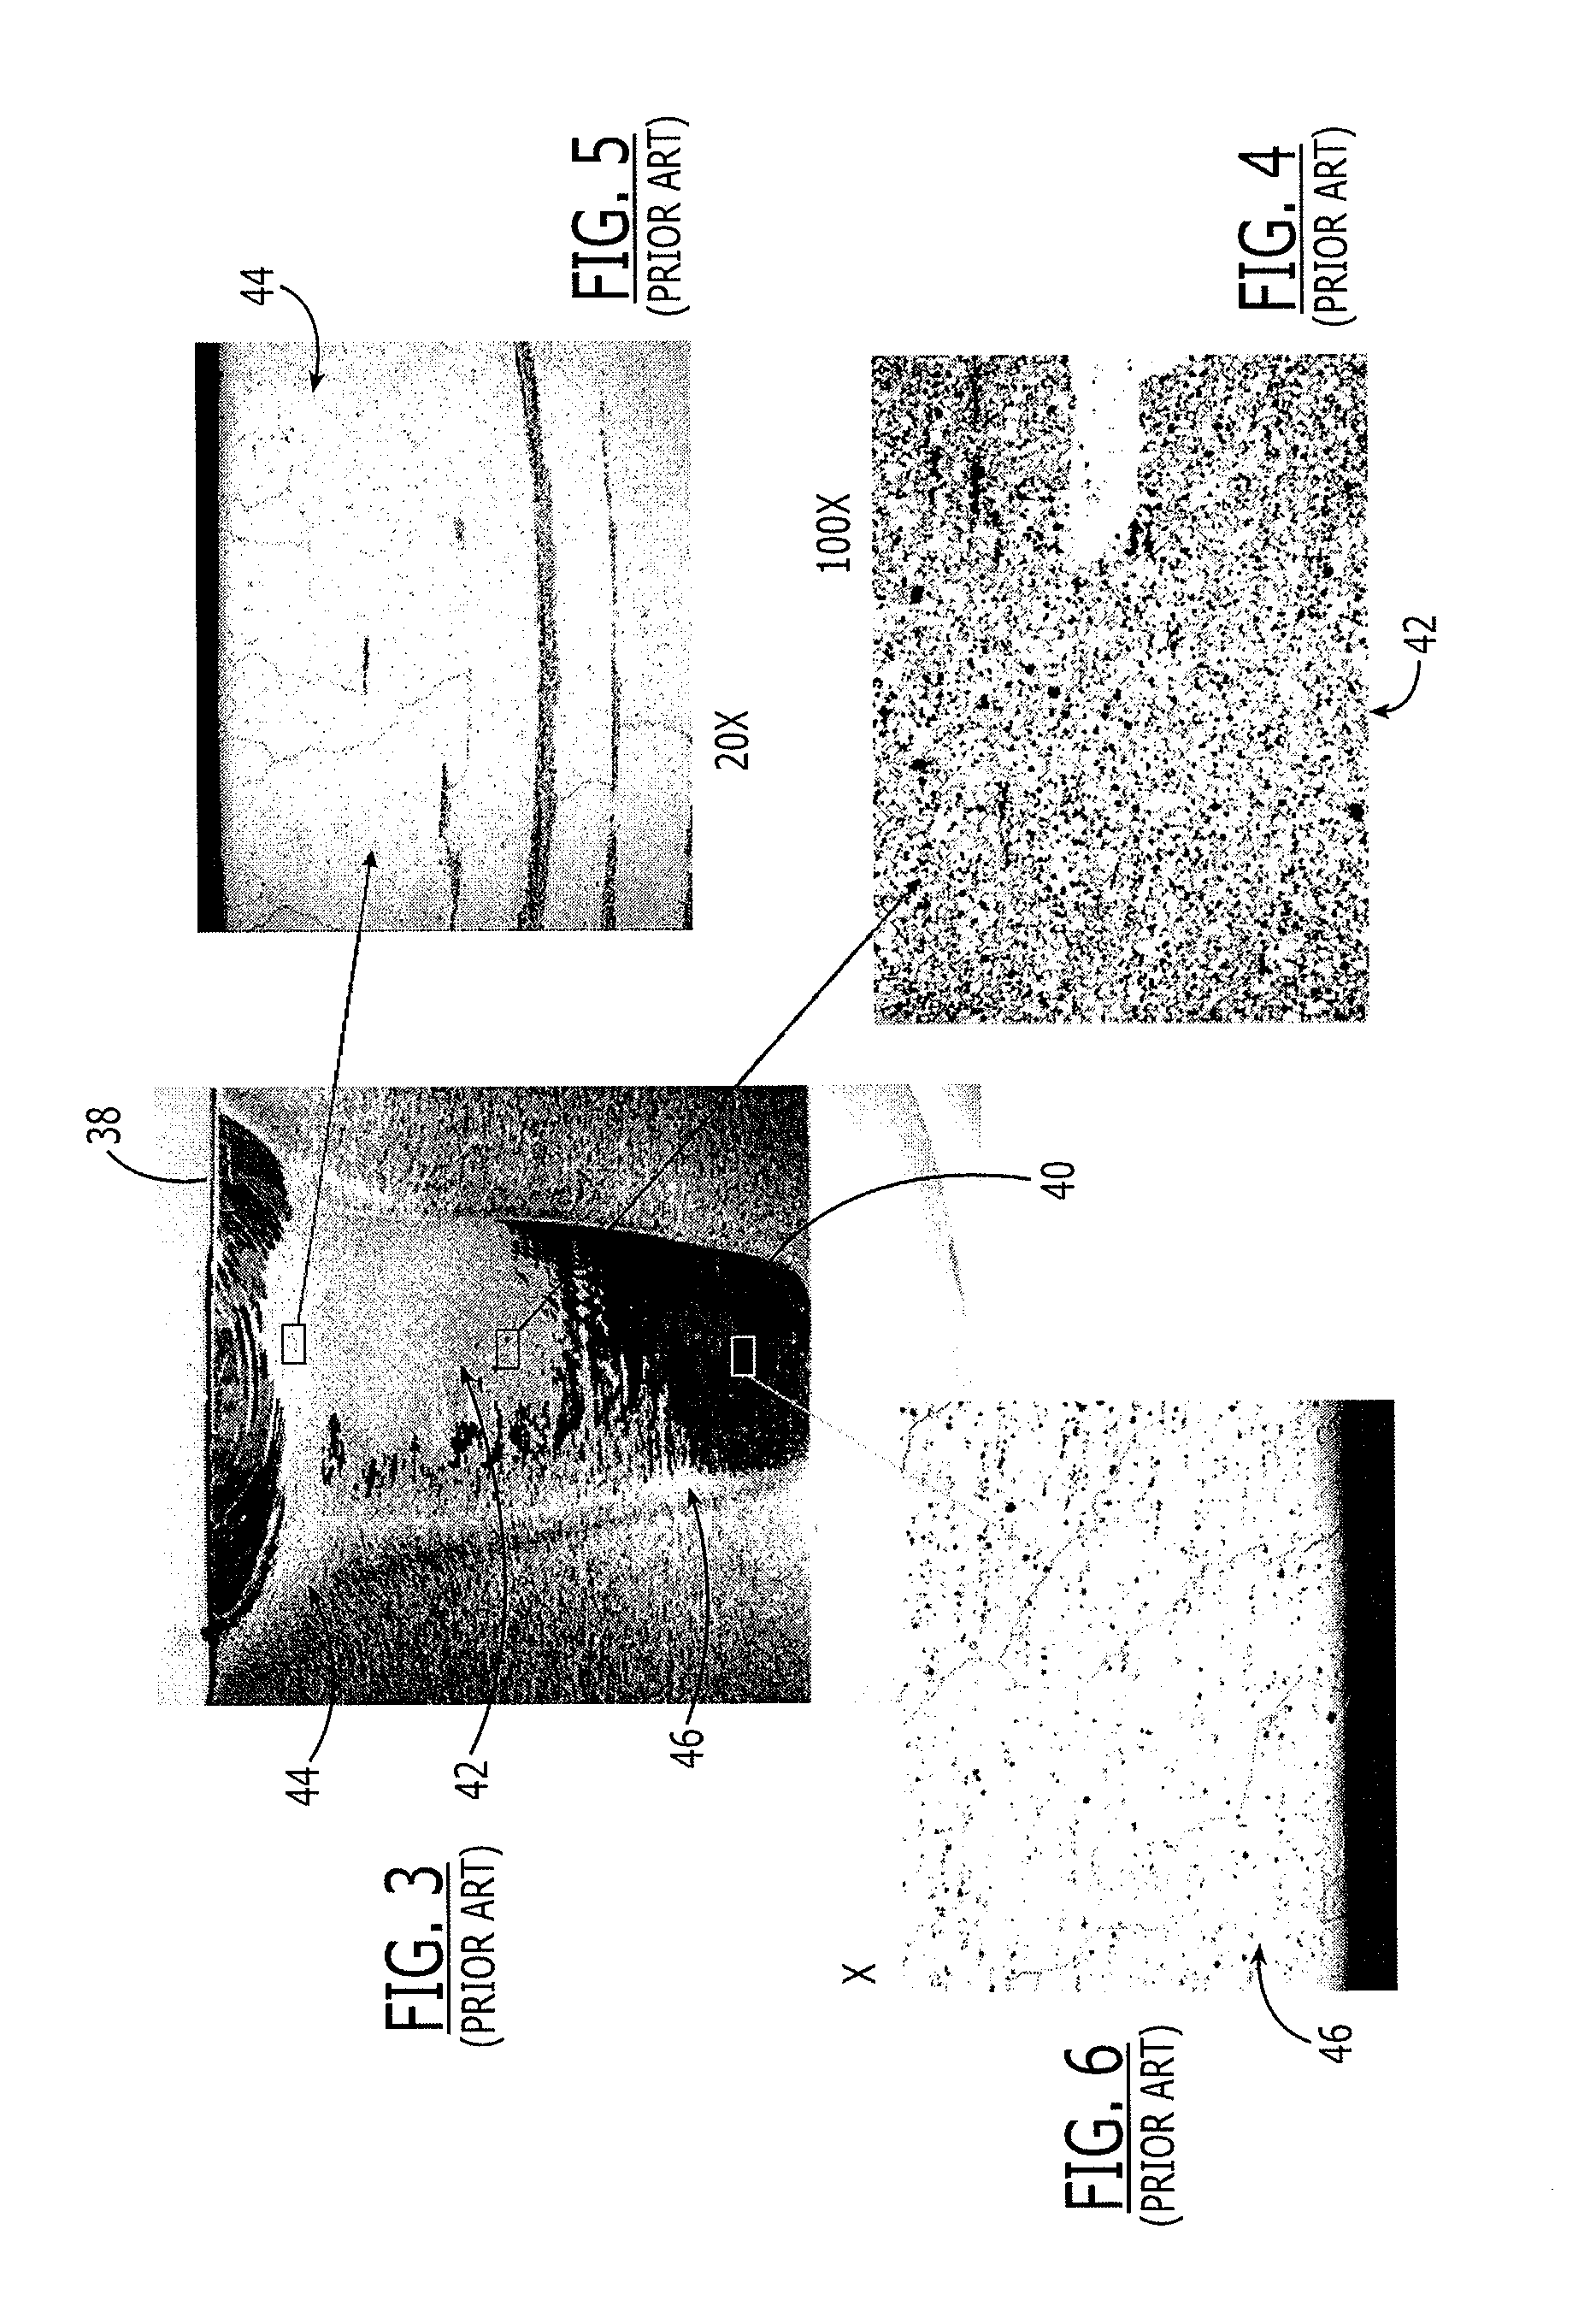 Method for Manufacturing a Workpiece by Friction Welding to Reduce the Occurrence of Abnormal Grain Growth